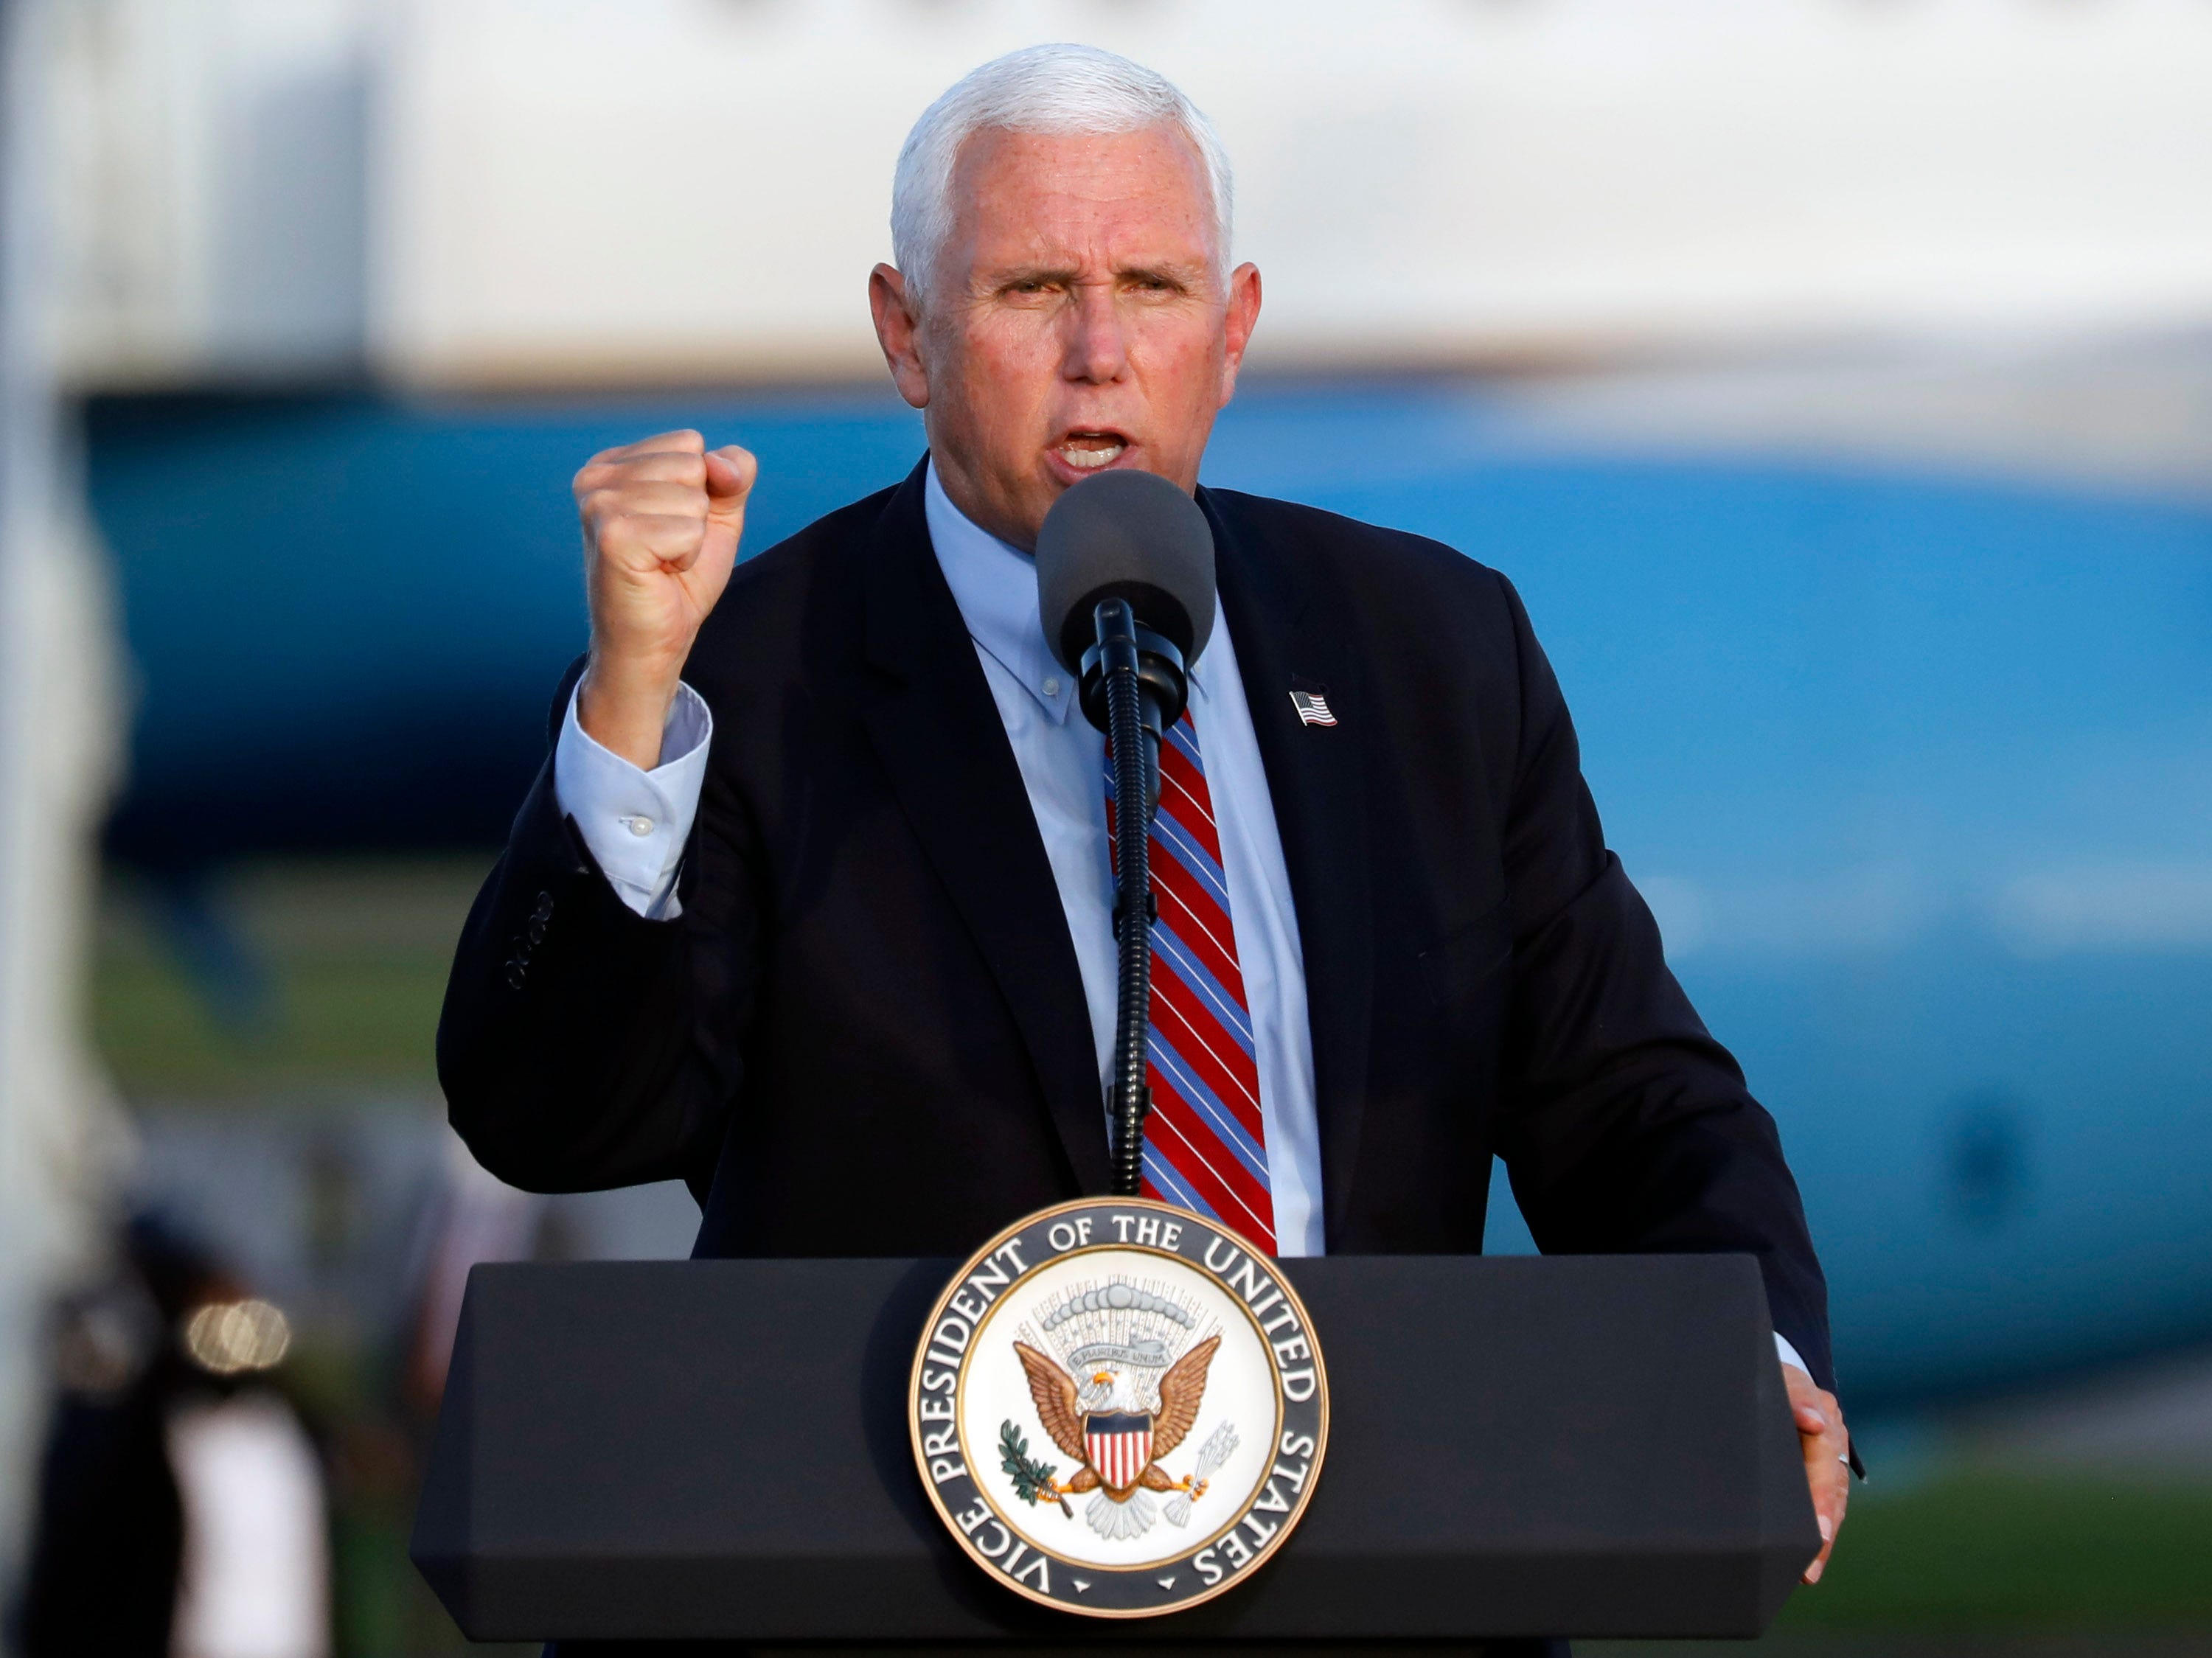 Vice President Mike Pence stirs up a crowd of more than 1,000 people during the "Make America Great Again Victory Rally" at Lakeland Linder International Airport on Saturday.